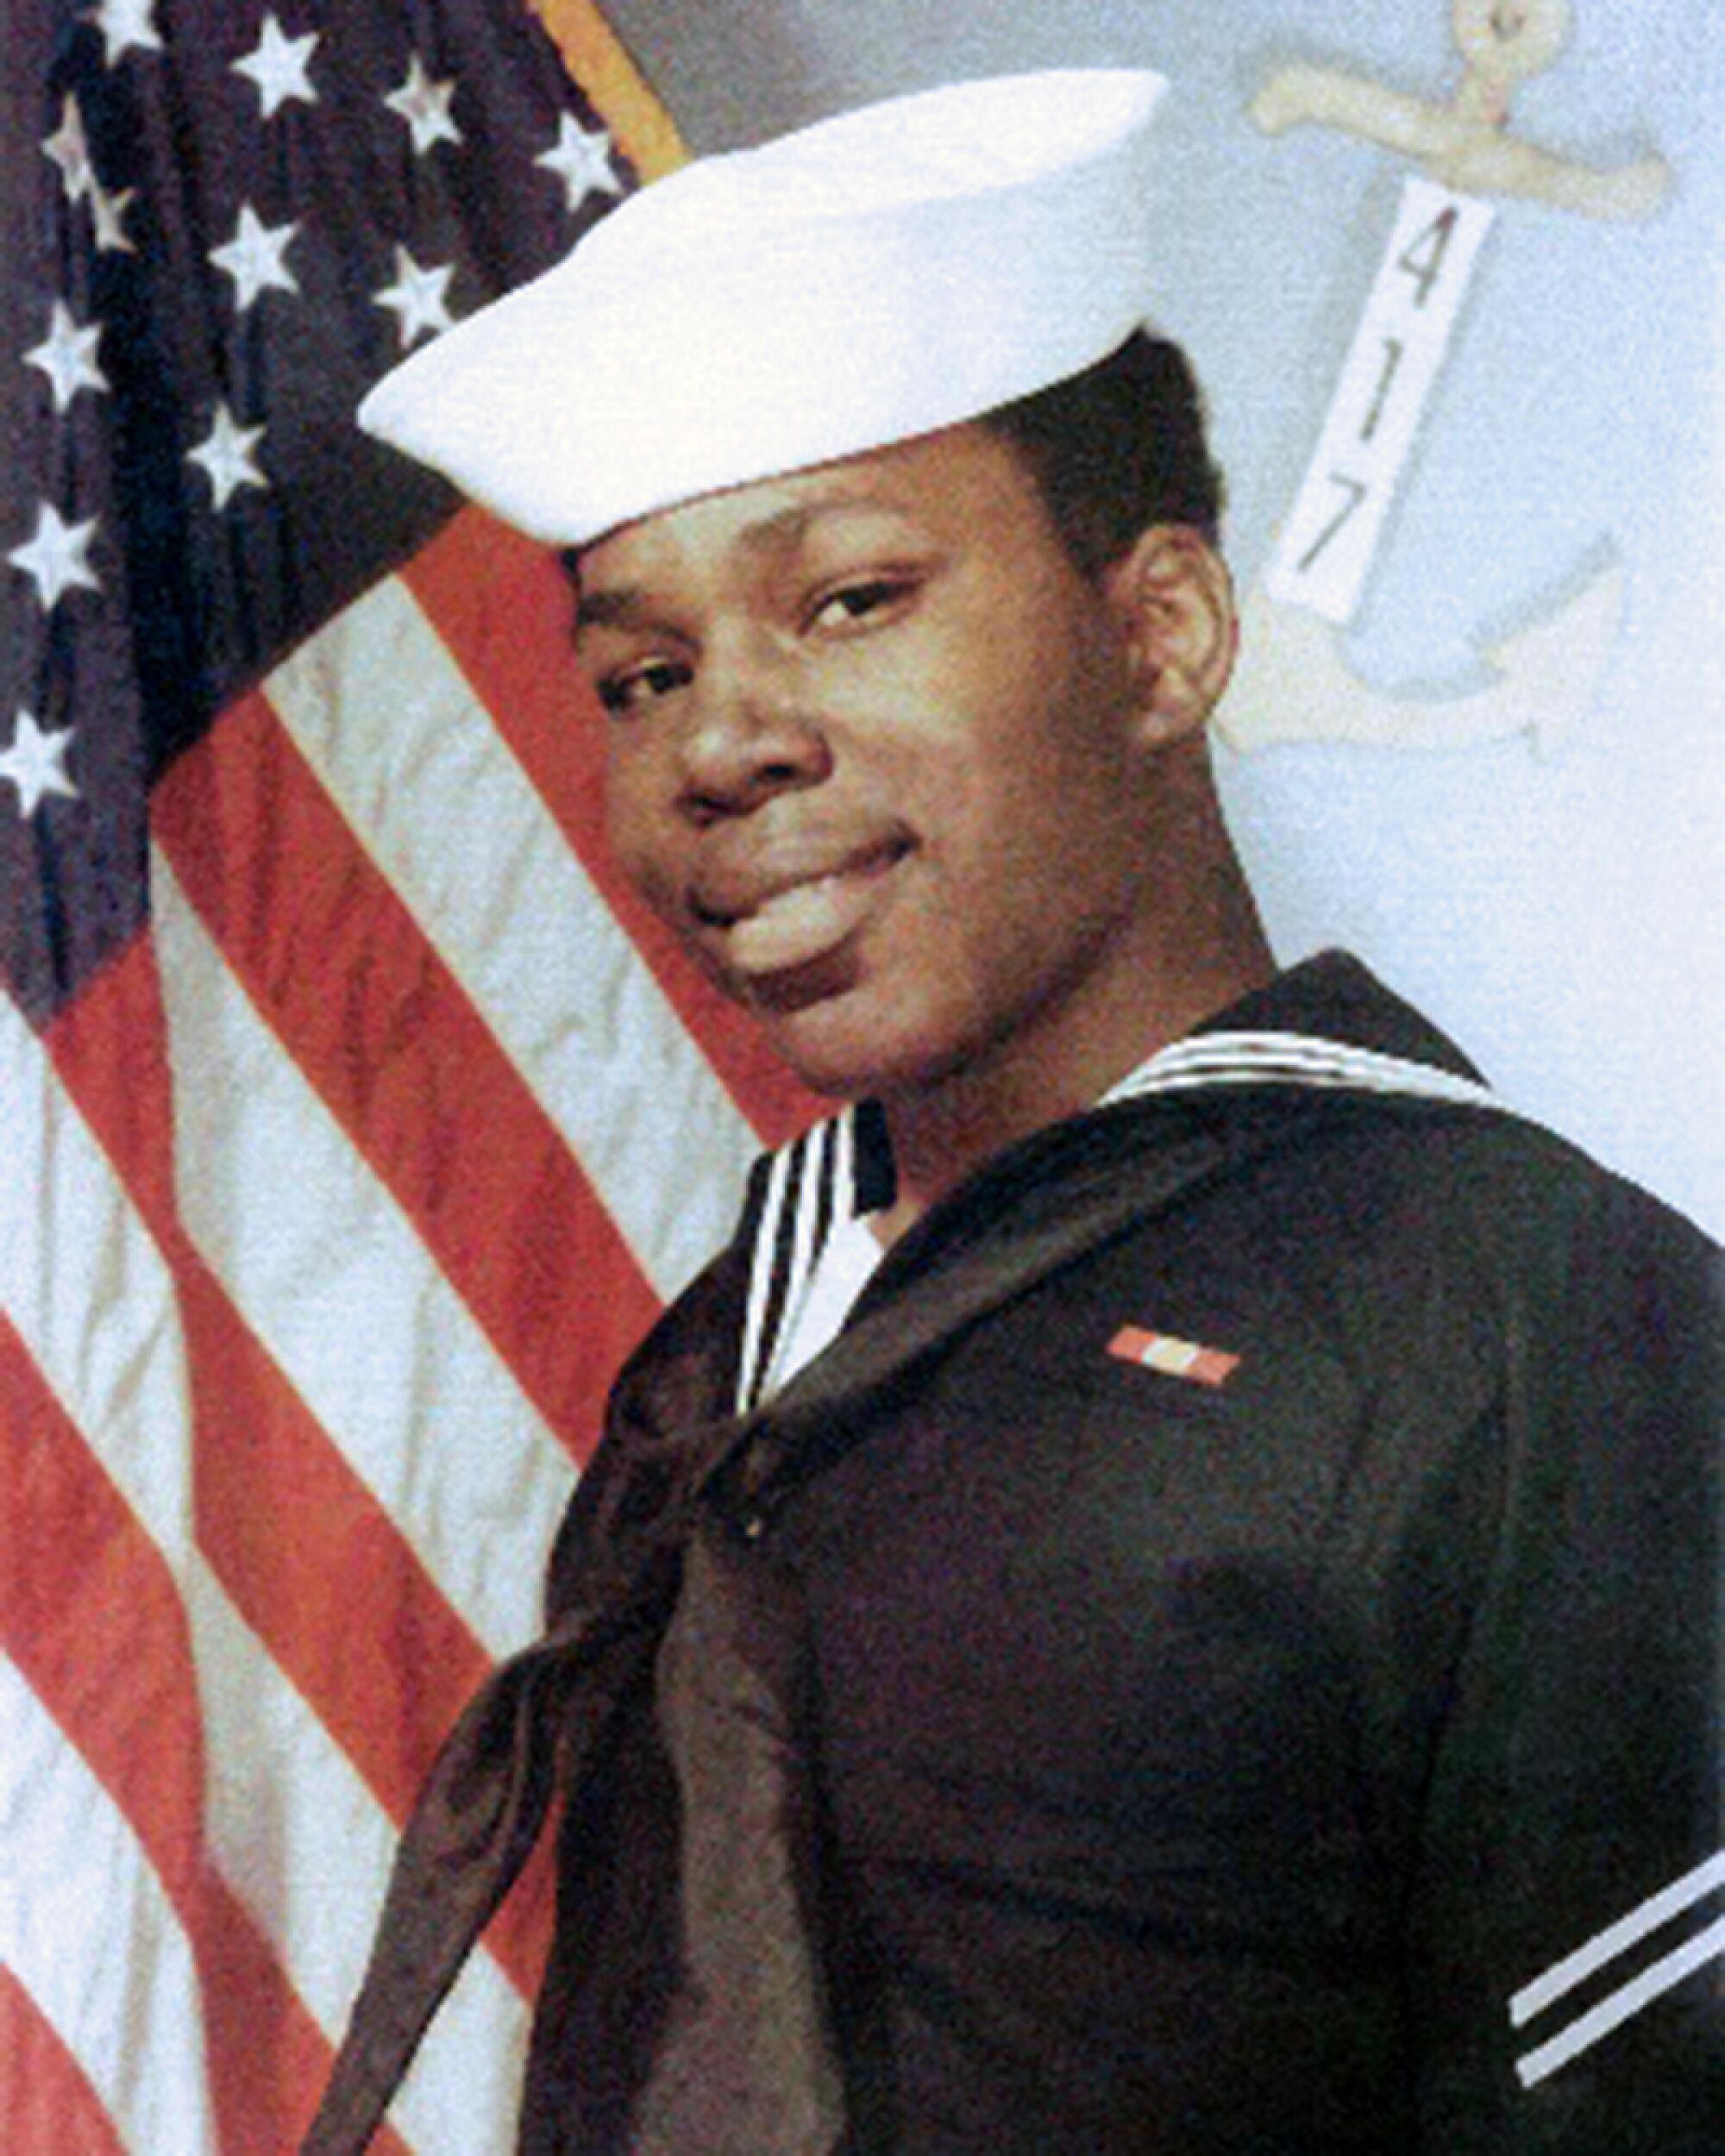 Seaman Cleveland Mallory was among those court martialed following the race riot.